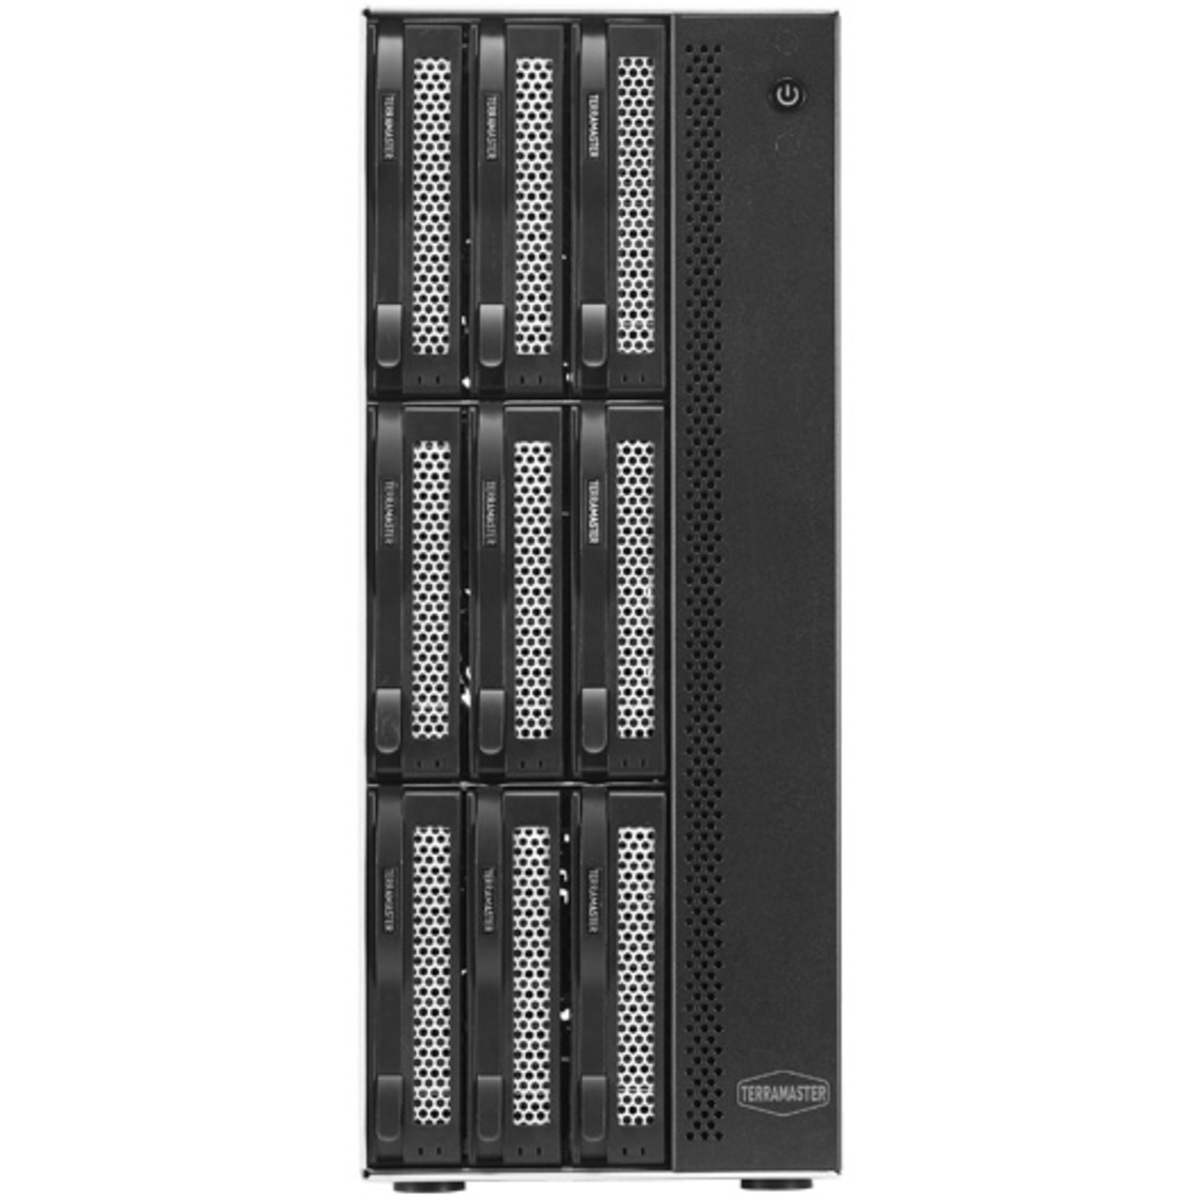 TerraMaster T9-423 40tb 9-Bay Desktop Multimedia / Power User / Business NAS - Network Attached Storage Device 5x8tb Seagate IronWolf Pro ST8000NT001 3.5 7200rpm SATA 6Gb/s HDD NAS Class Drives Installed - Burn-In Tested - ON SALE T9-423